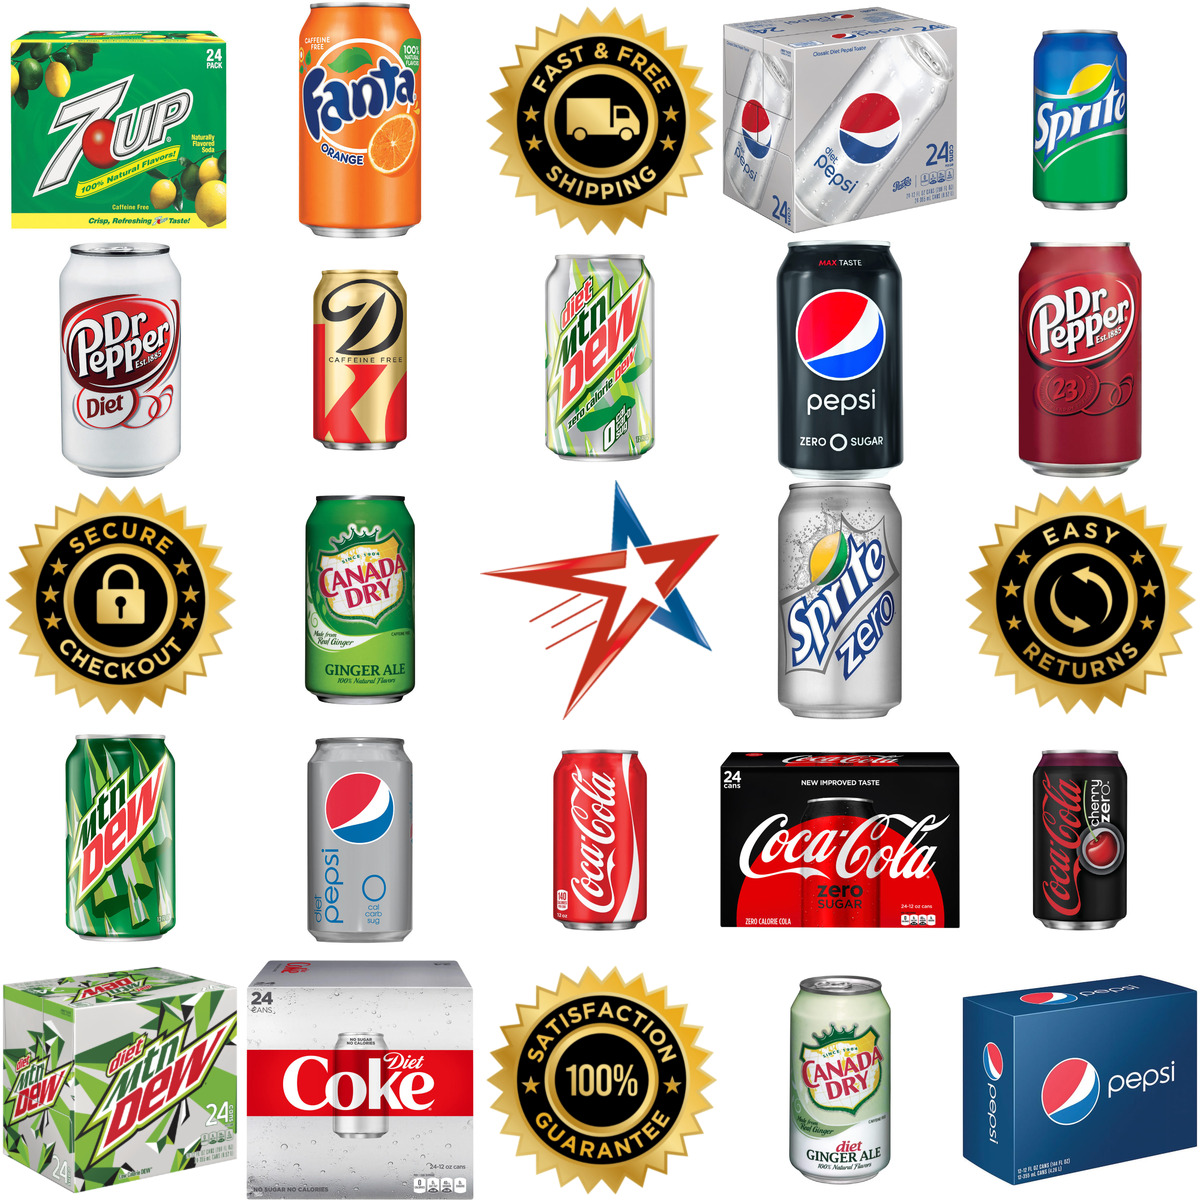 A selection of Soda products on GoVets